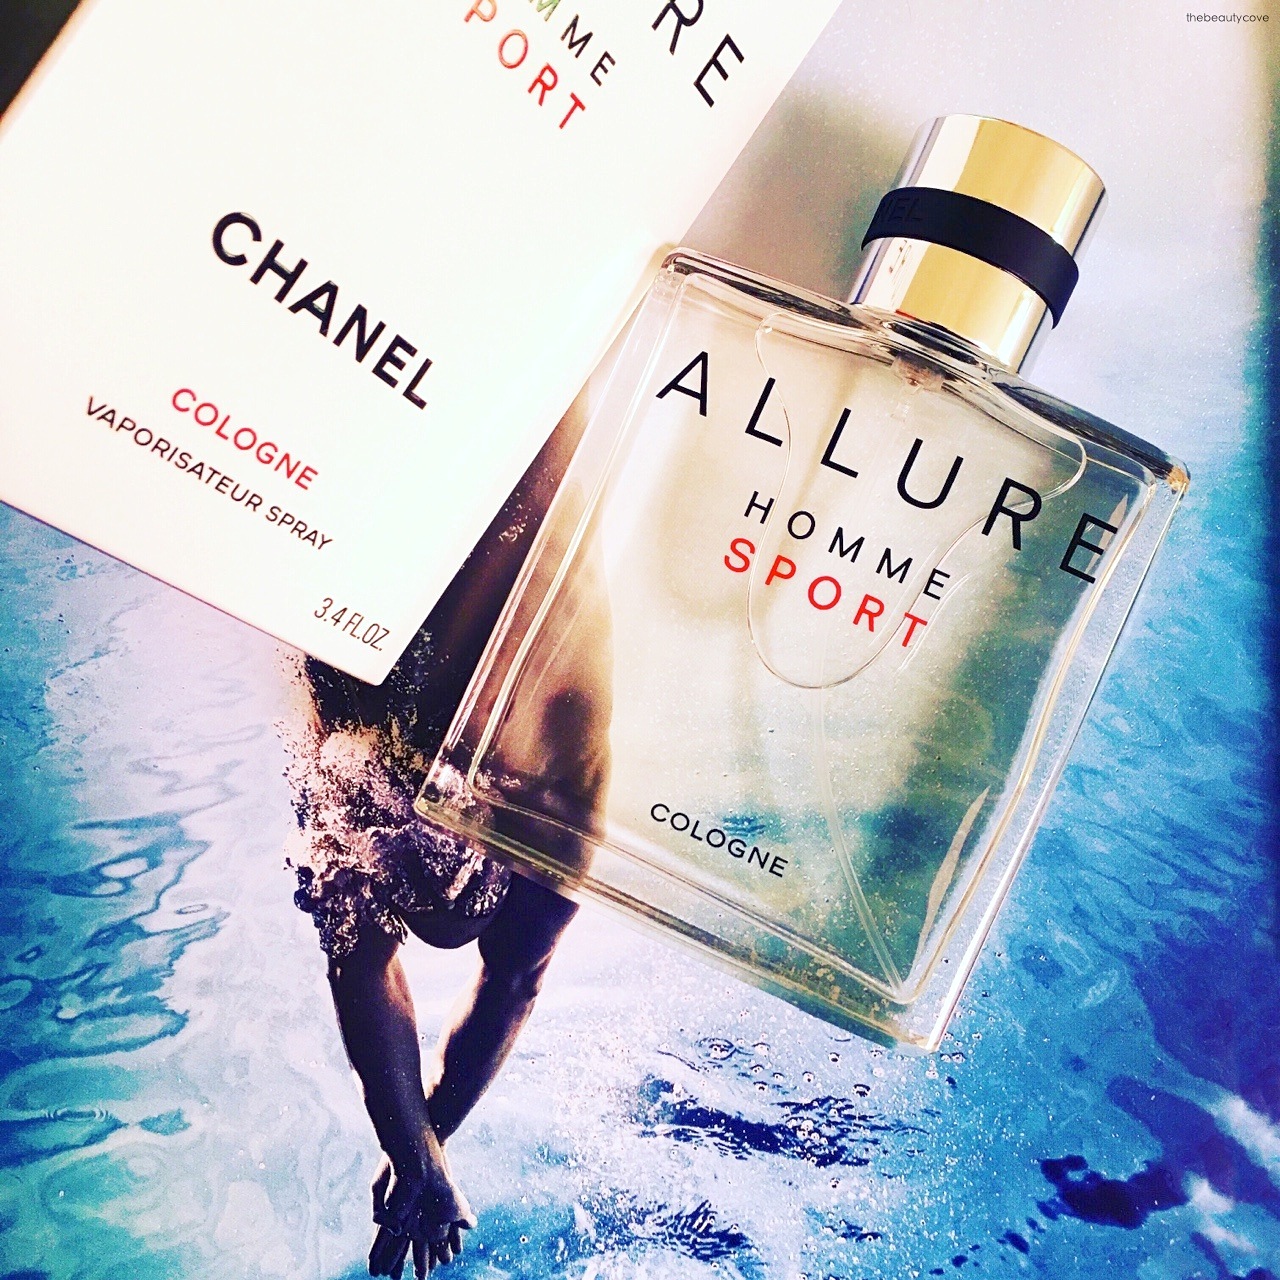 Allure sport cologne. Chanel homme Sport Cologne. Chanel Allure homme Sport Cologne. Одеколон Allure homme Sport. Chanel Allure Sport Cologne.